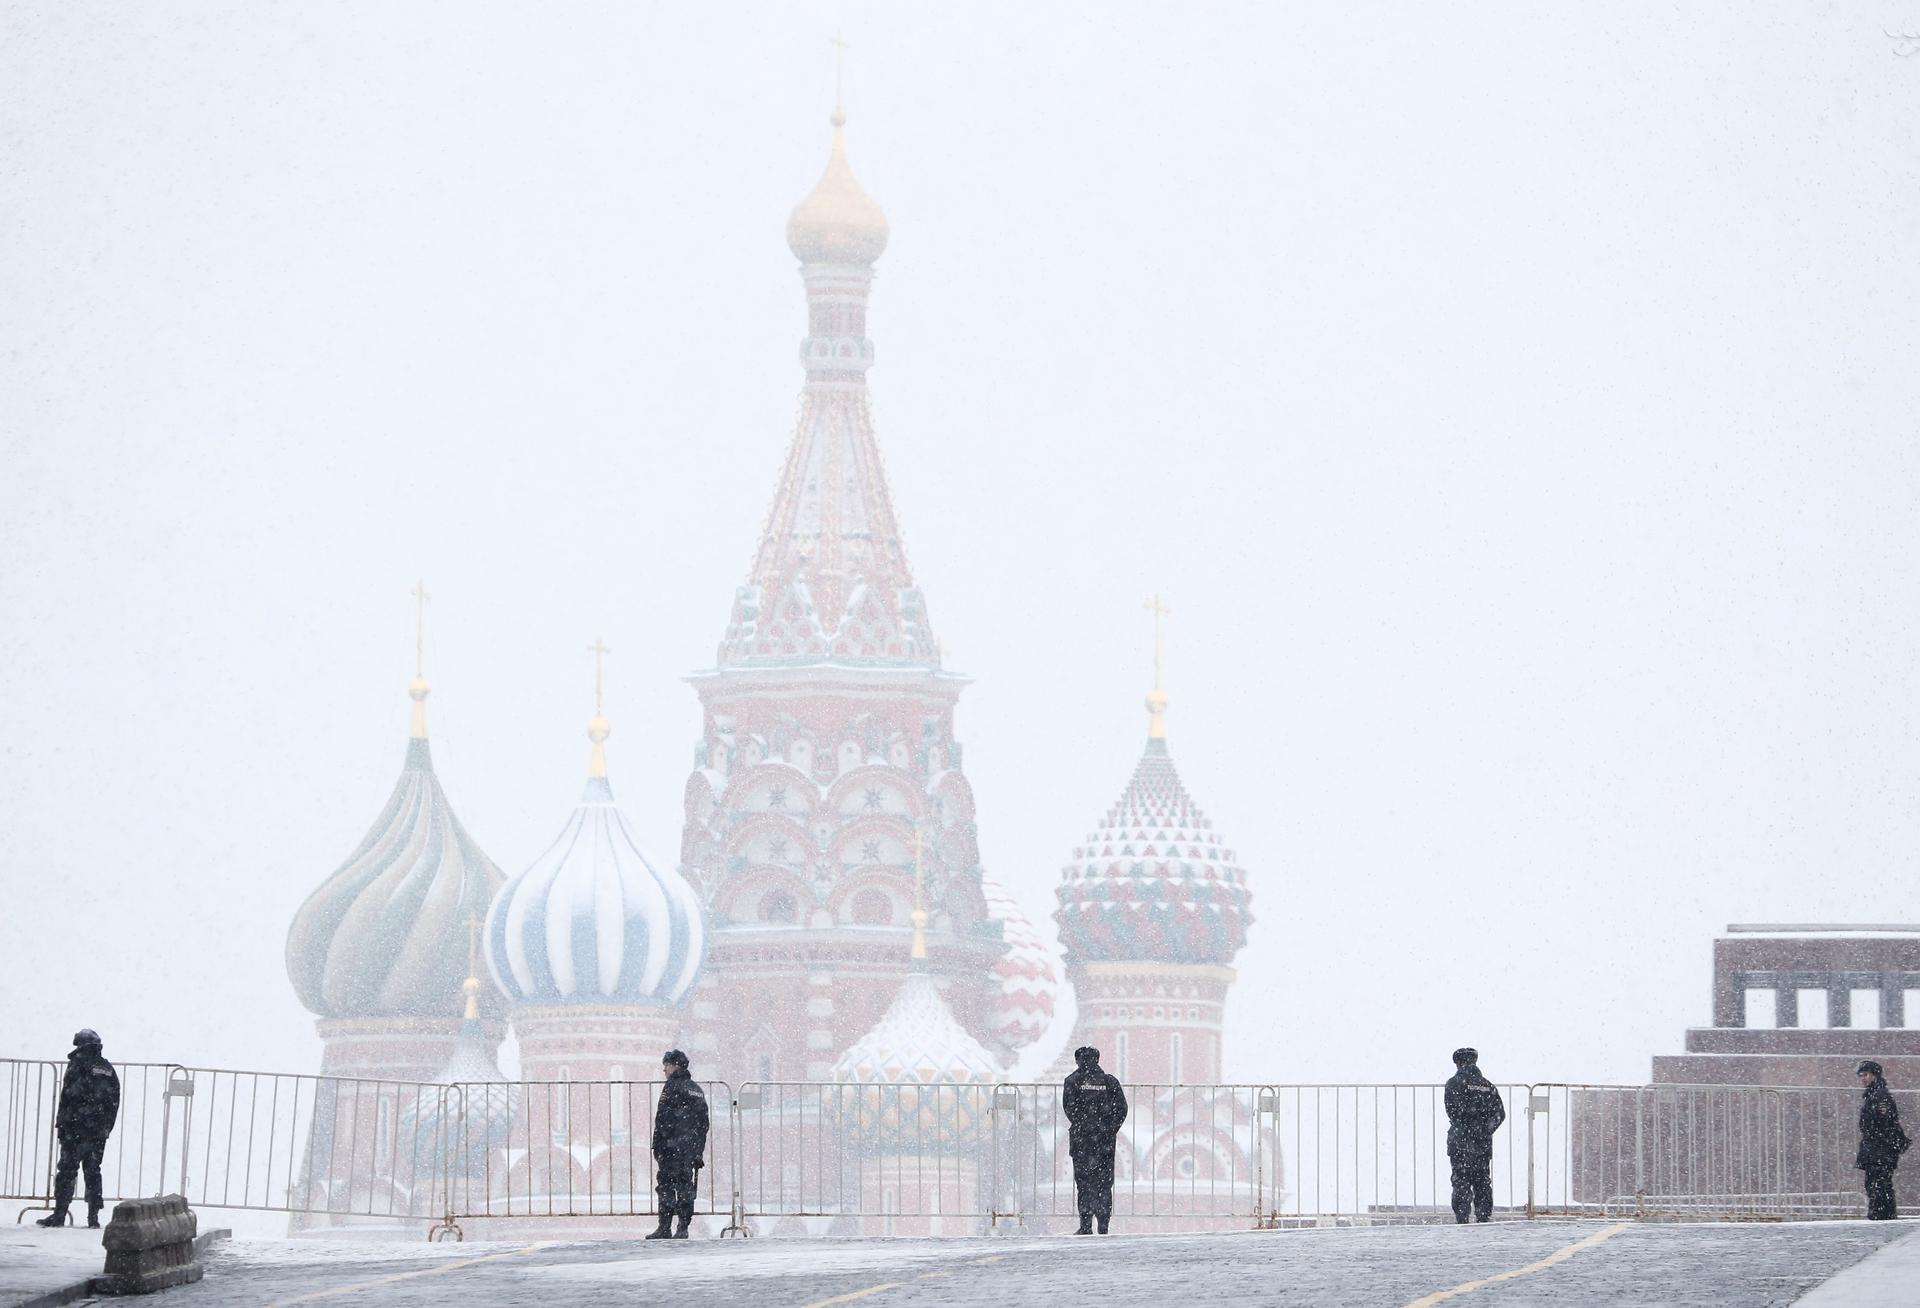 Police block access to the Red Square during a snowfall